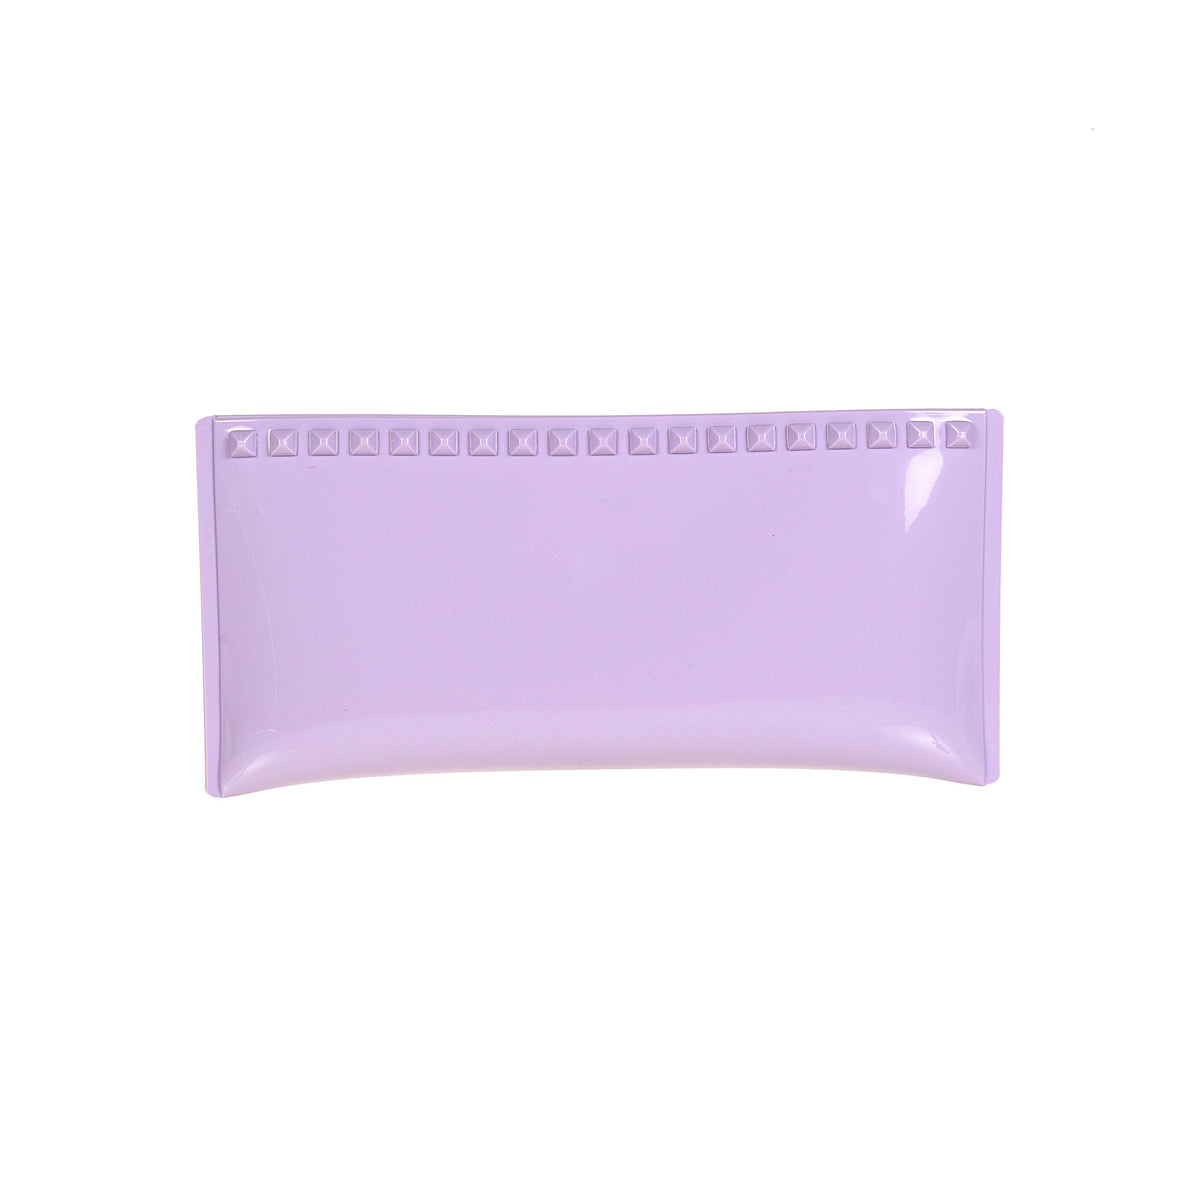 Studded jelly purse from Carmen Sol in color violet